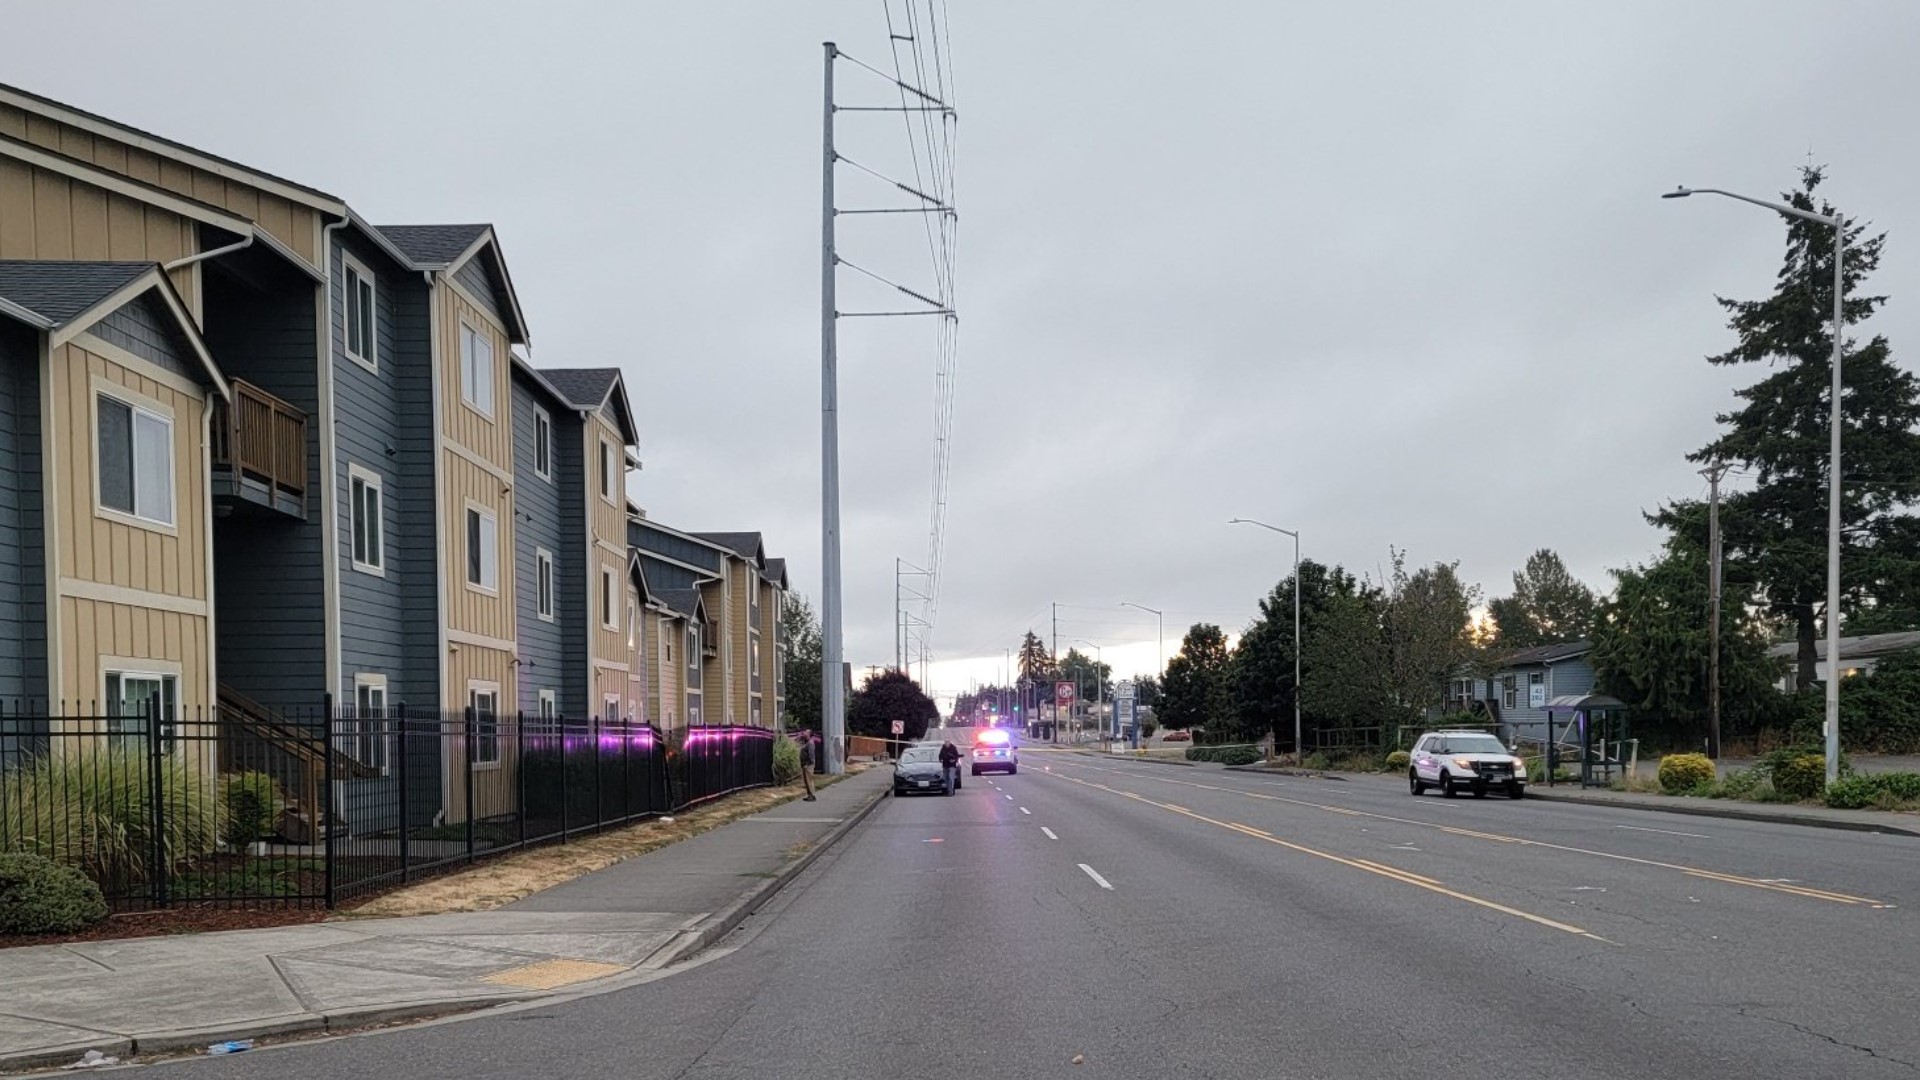 The death of a person who was found in a street in Tacoma on Monday morning is being investigated as a homicide.